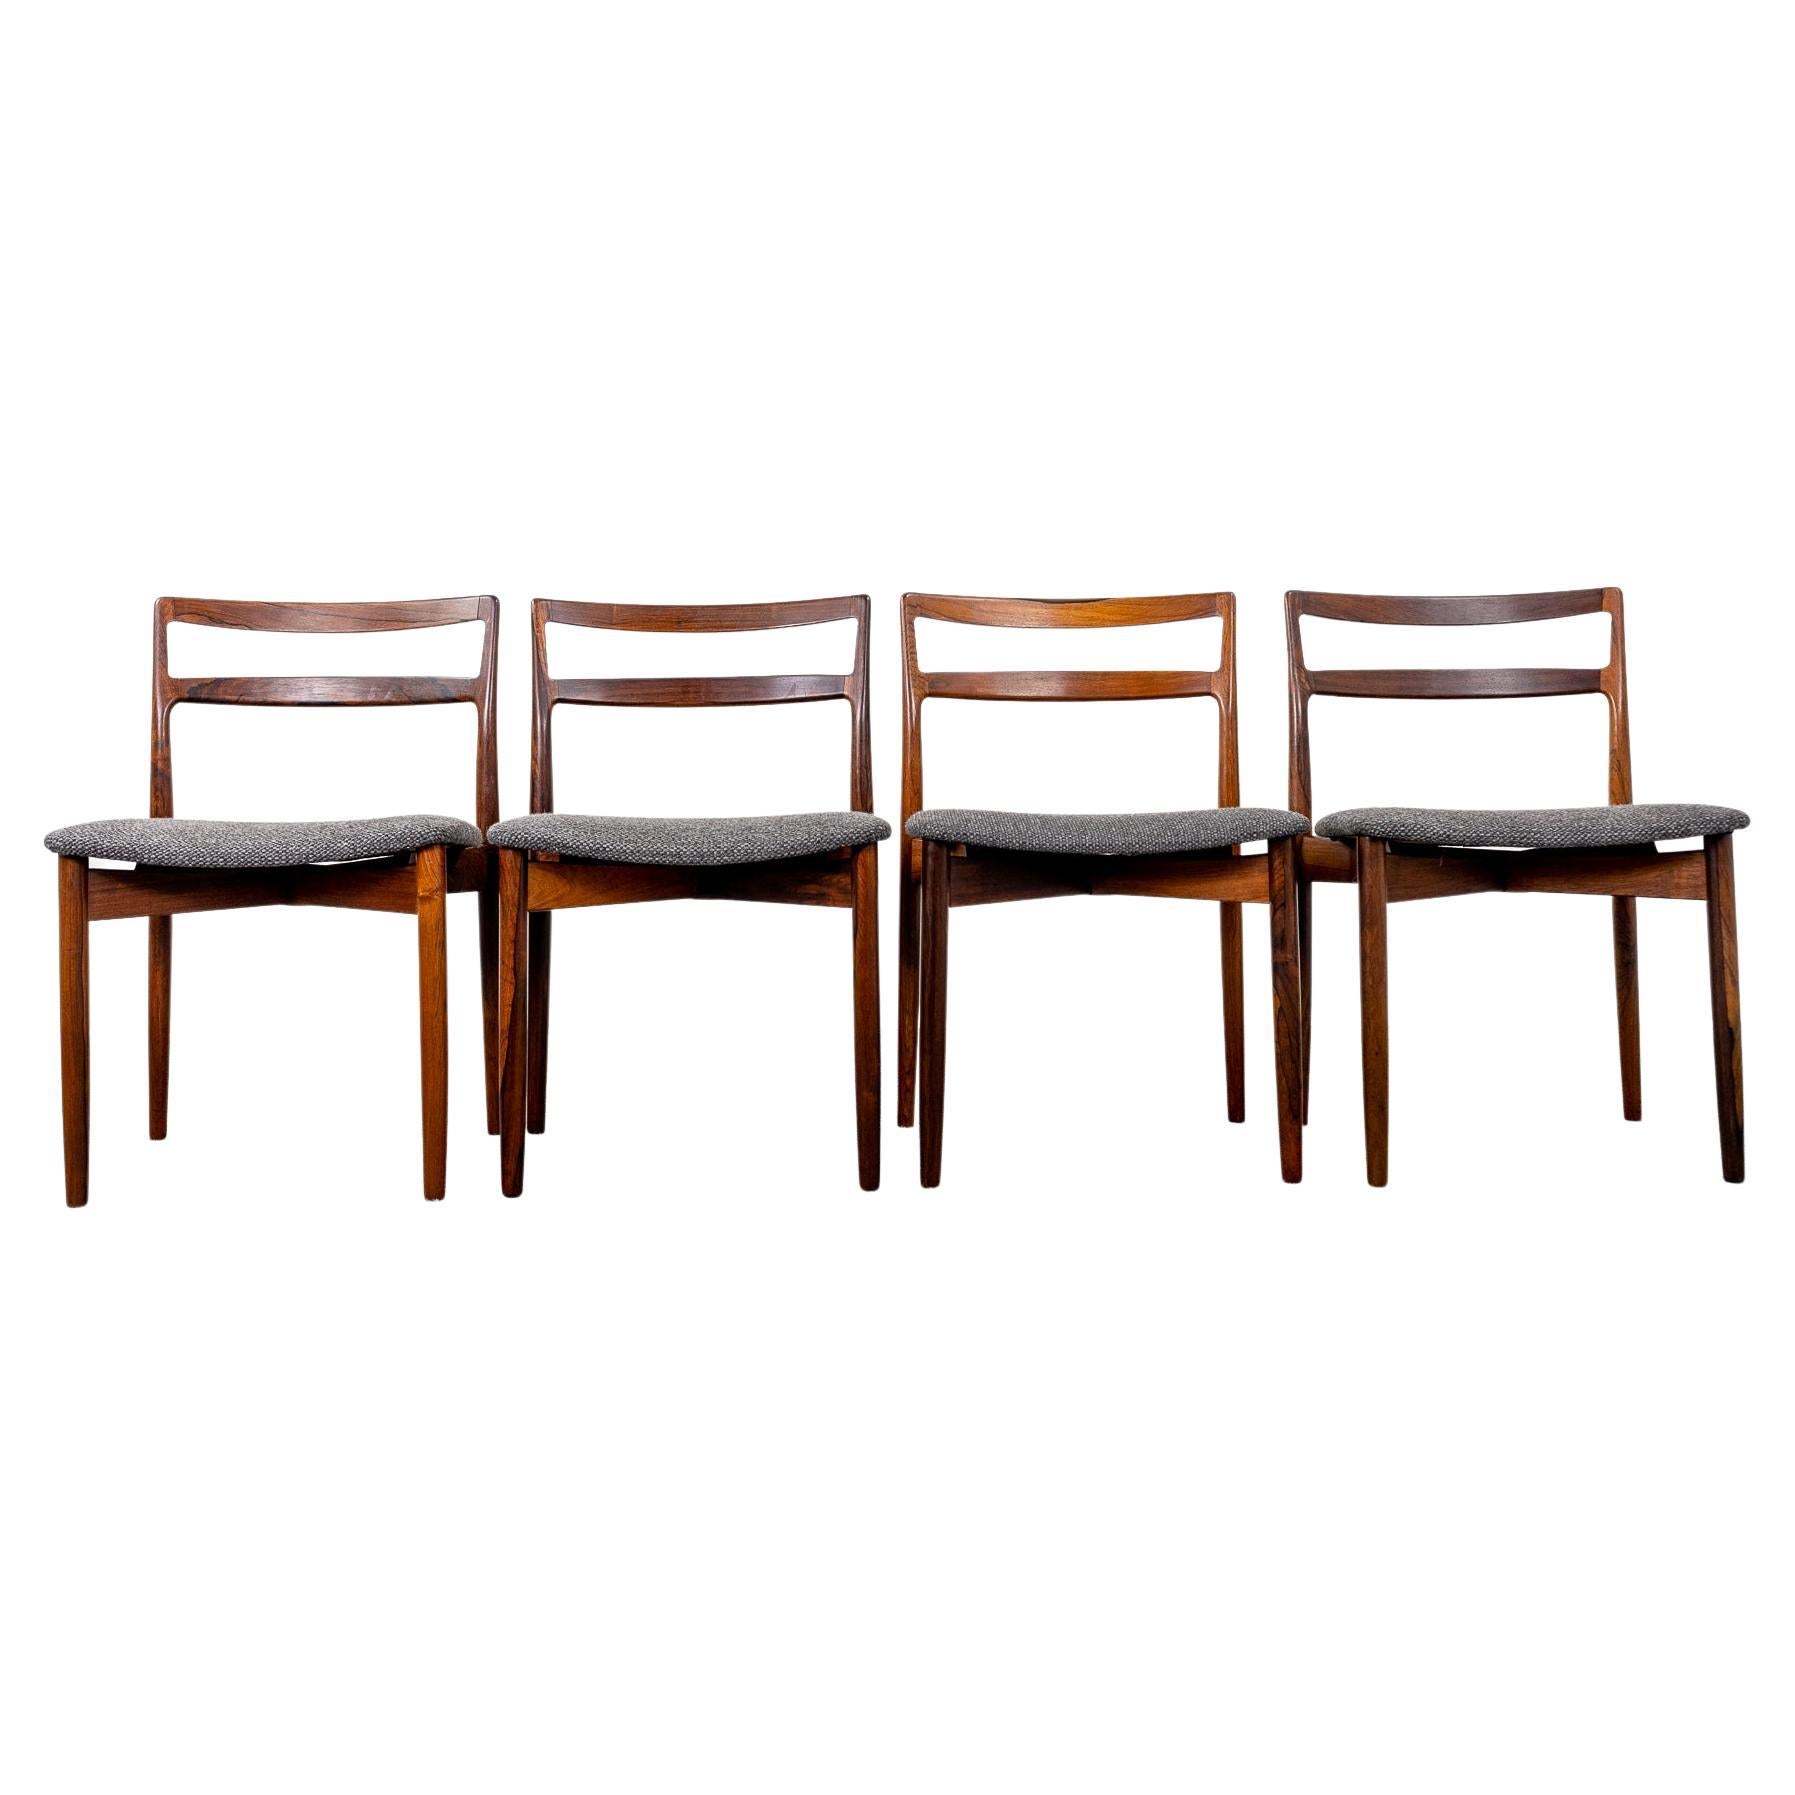 4 Danish Mid-Century Rosewood "Model 61" Dining Chairs, by Harry Ostergaard